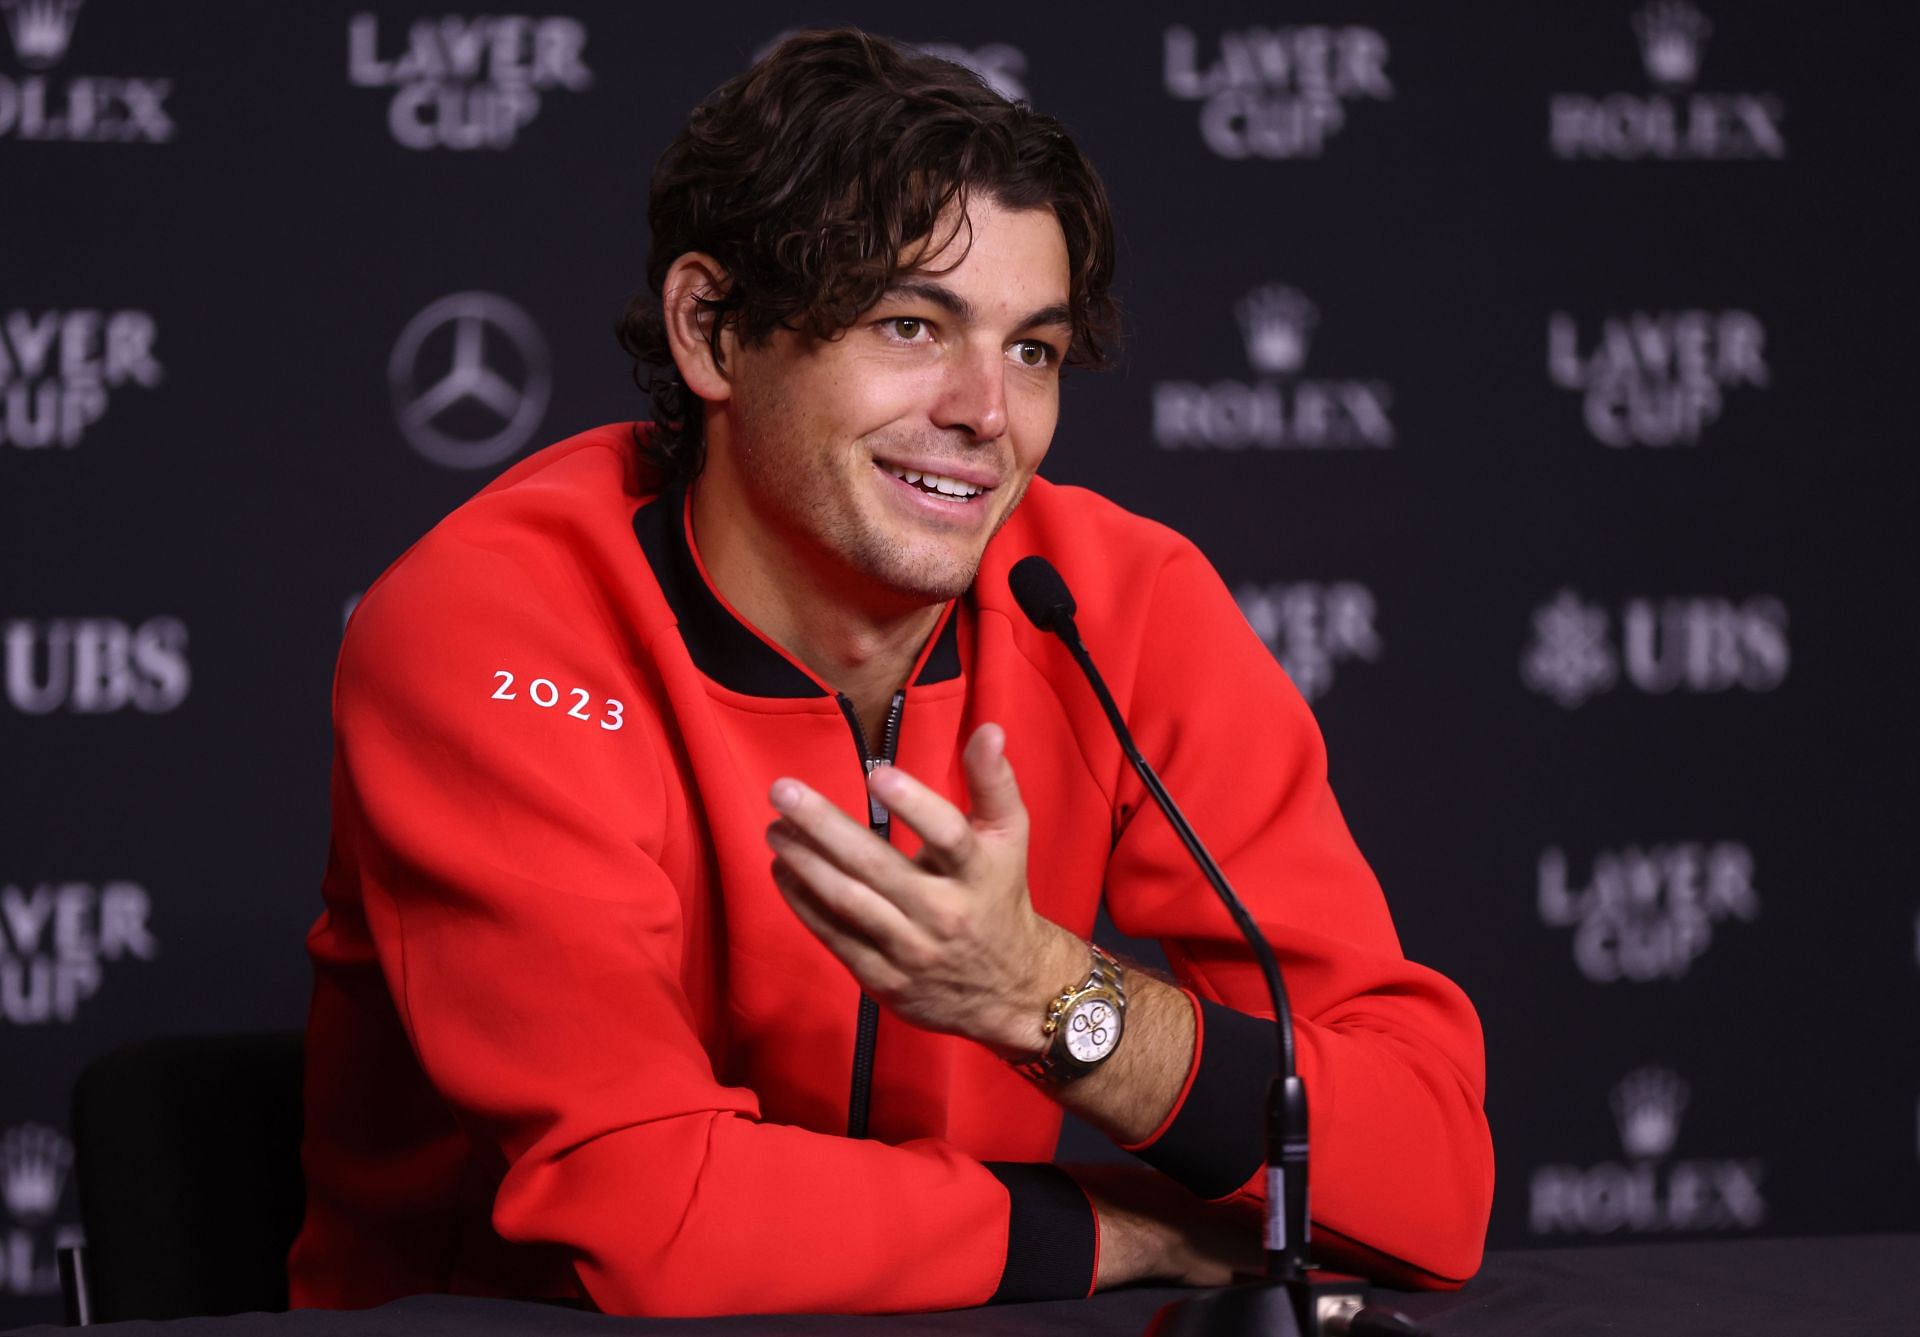 Taylor Fritz at the Laver Cup 2023 - Day 2